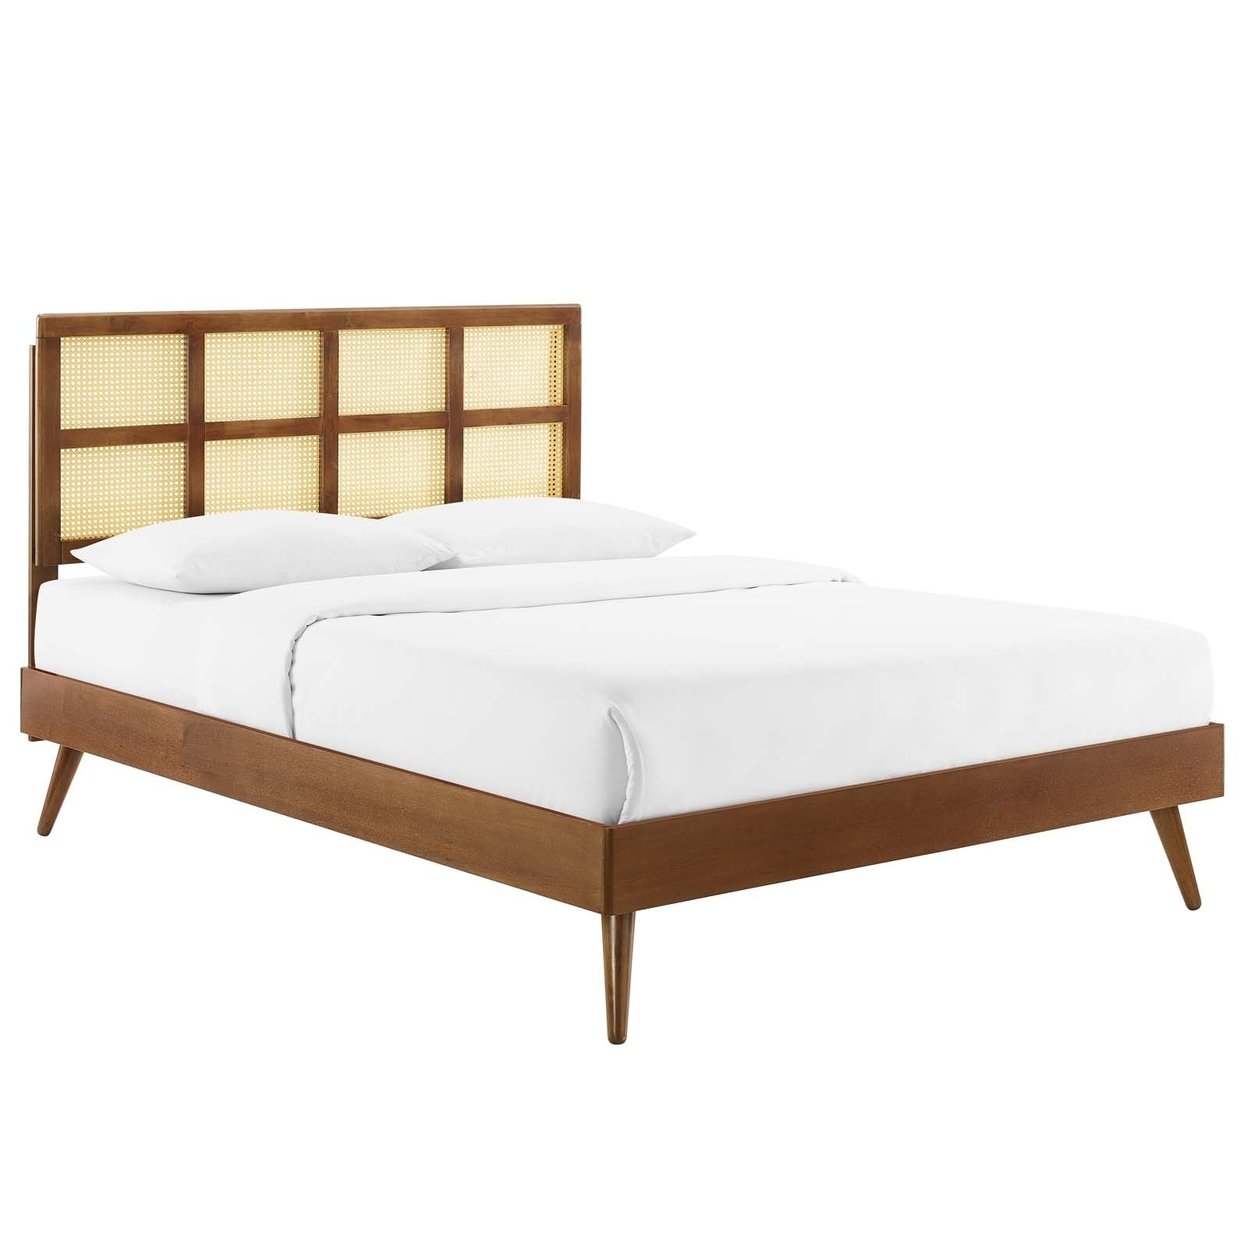 Sidney Cane And Wood King Platform Bed With Splayed Legs, Walnut